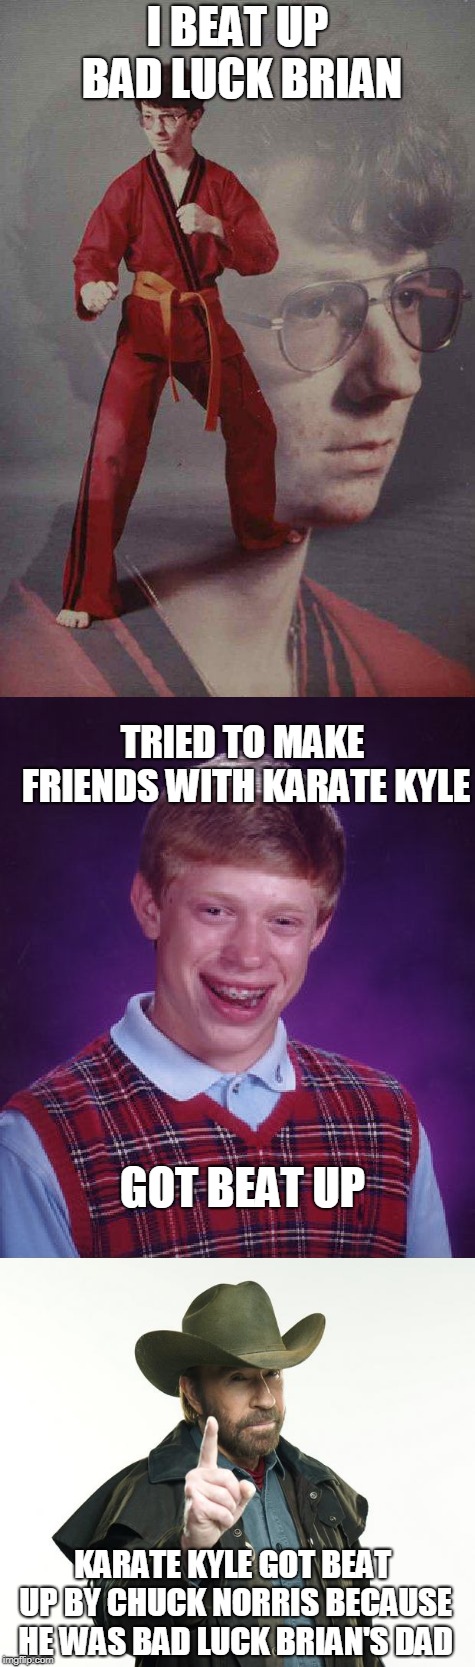 Don't mess with bad luck Brian! | I BEAT UP BAD LUCK BRIAN; TRIED TO MAKE FRIENDS WITH KARATE KYLE; GOT BEAT UP; KARATE KYLE GOT BEAT UP BY CHUCK NORRIS BECAUSE HE WAS BAD LUCK BRIAN'S DAD | image tagged in bad luck brian,karate kyle,chuck norris | made w/ Imgflip meme maker